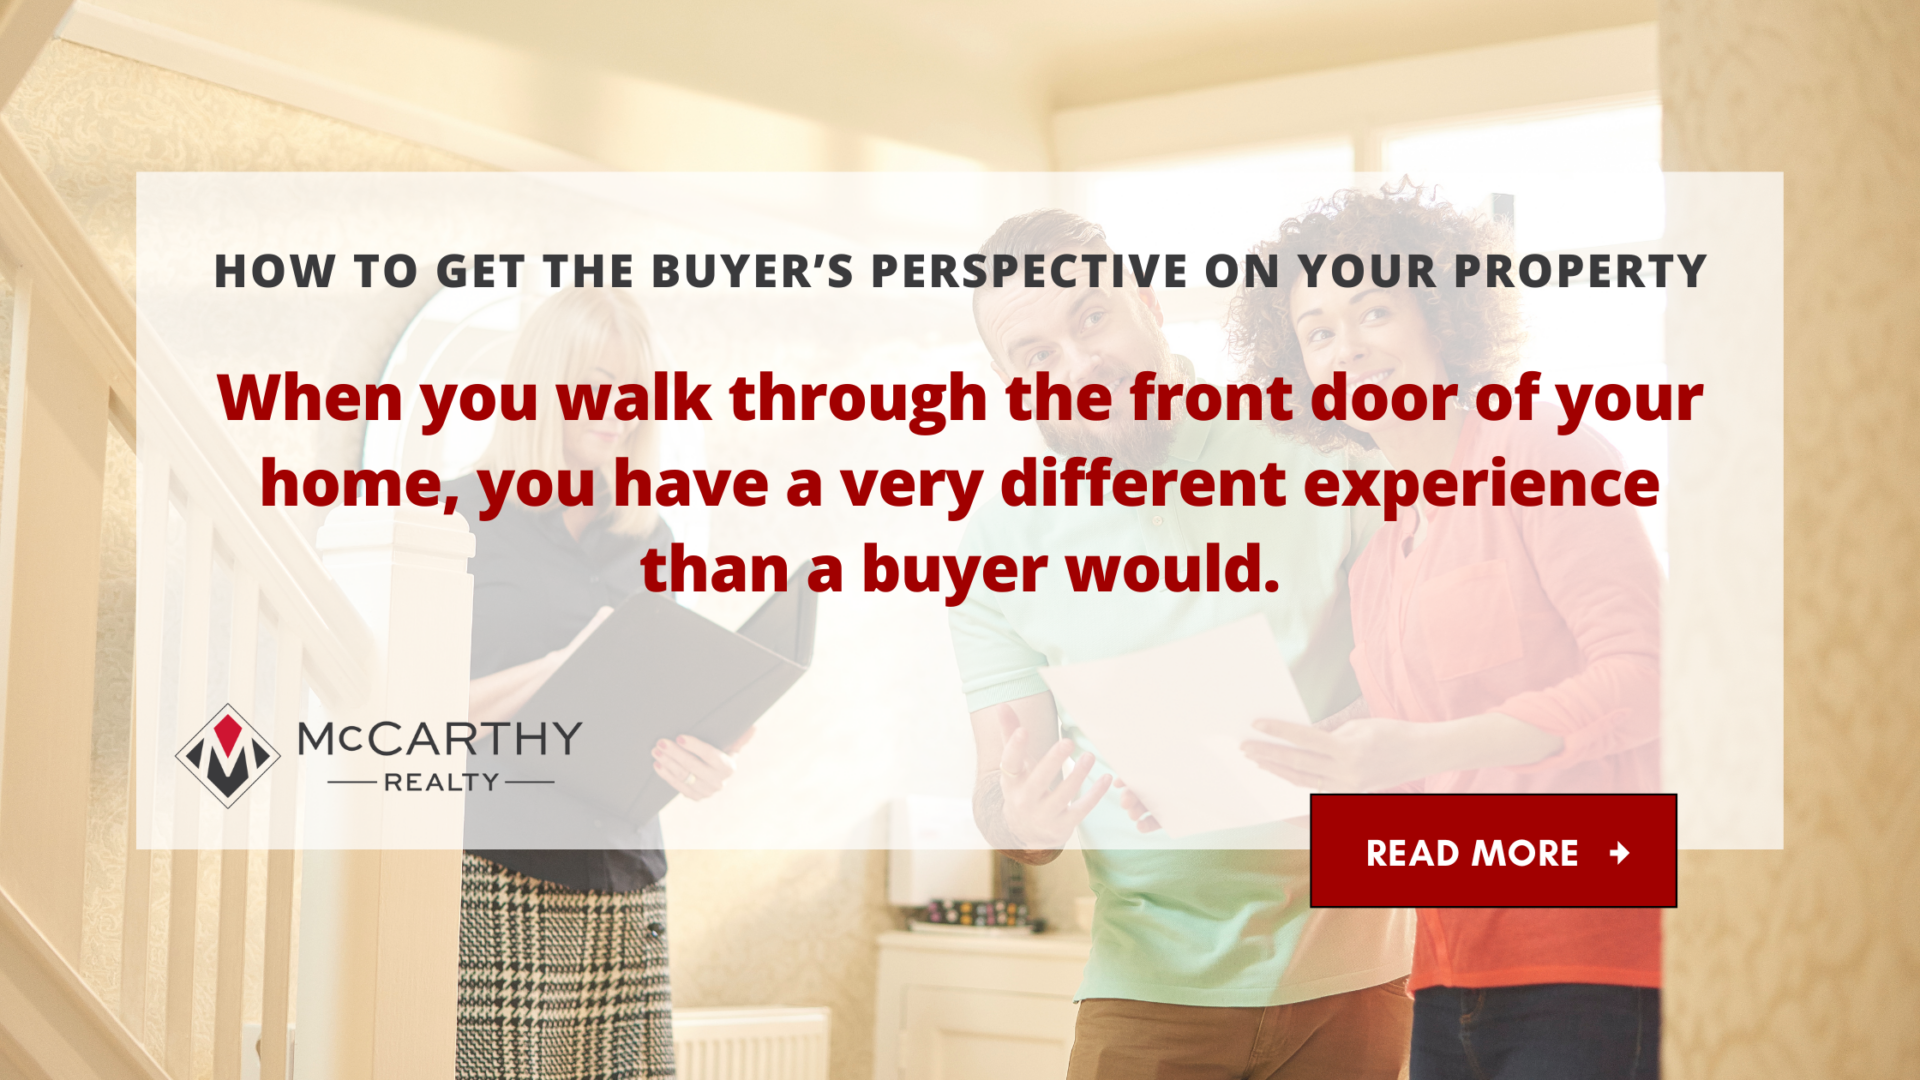 How to Get the Buyer’s Perspective on your Property